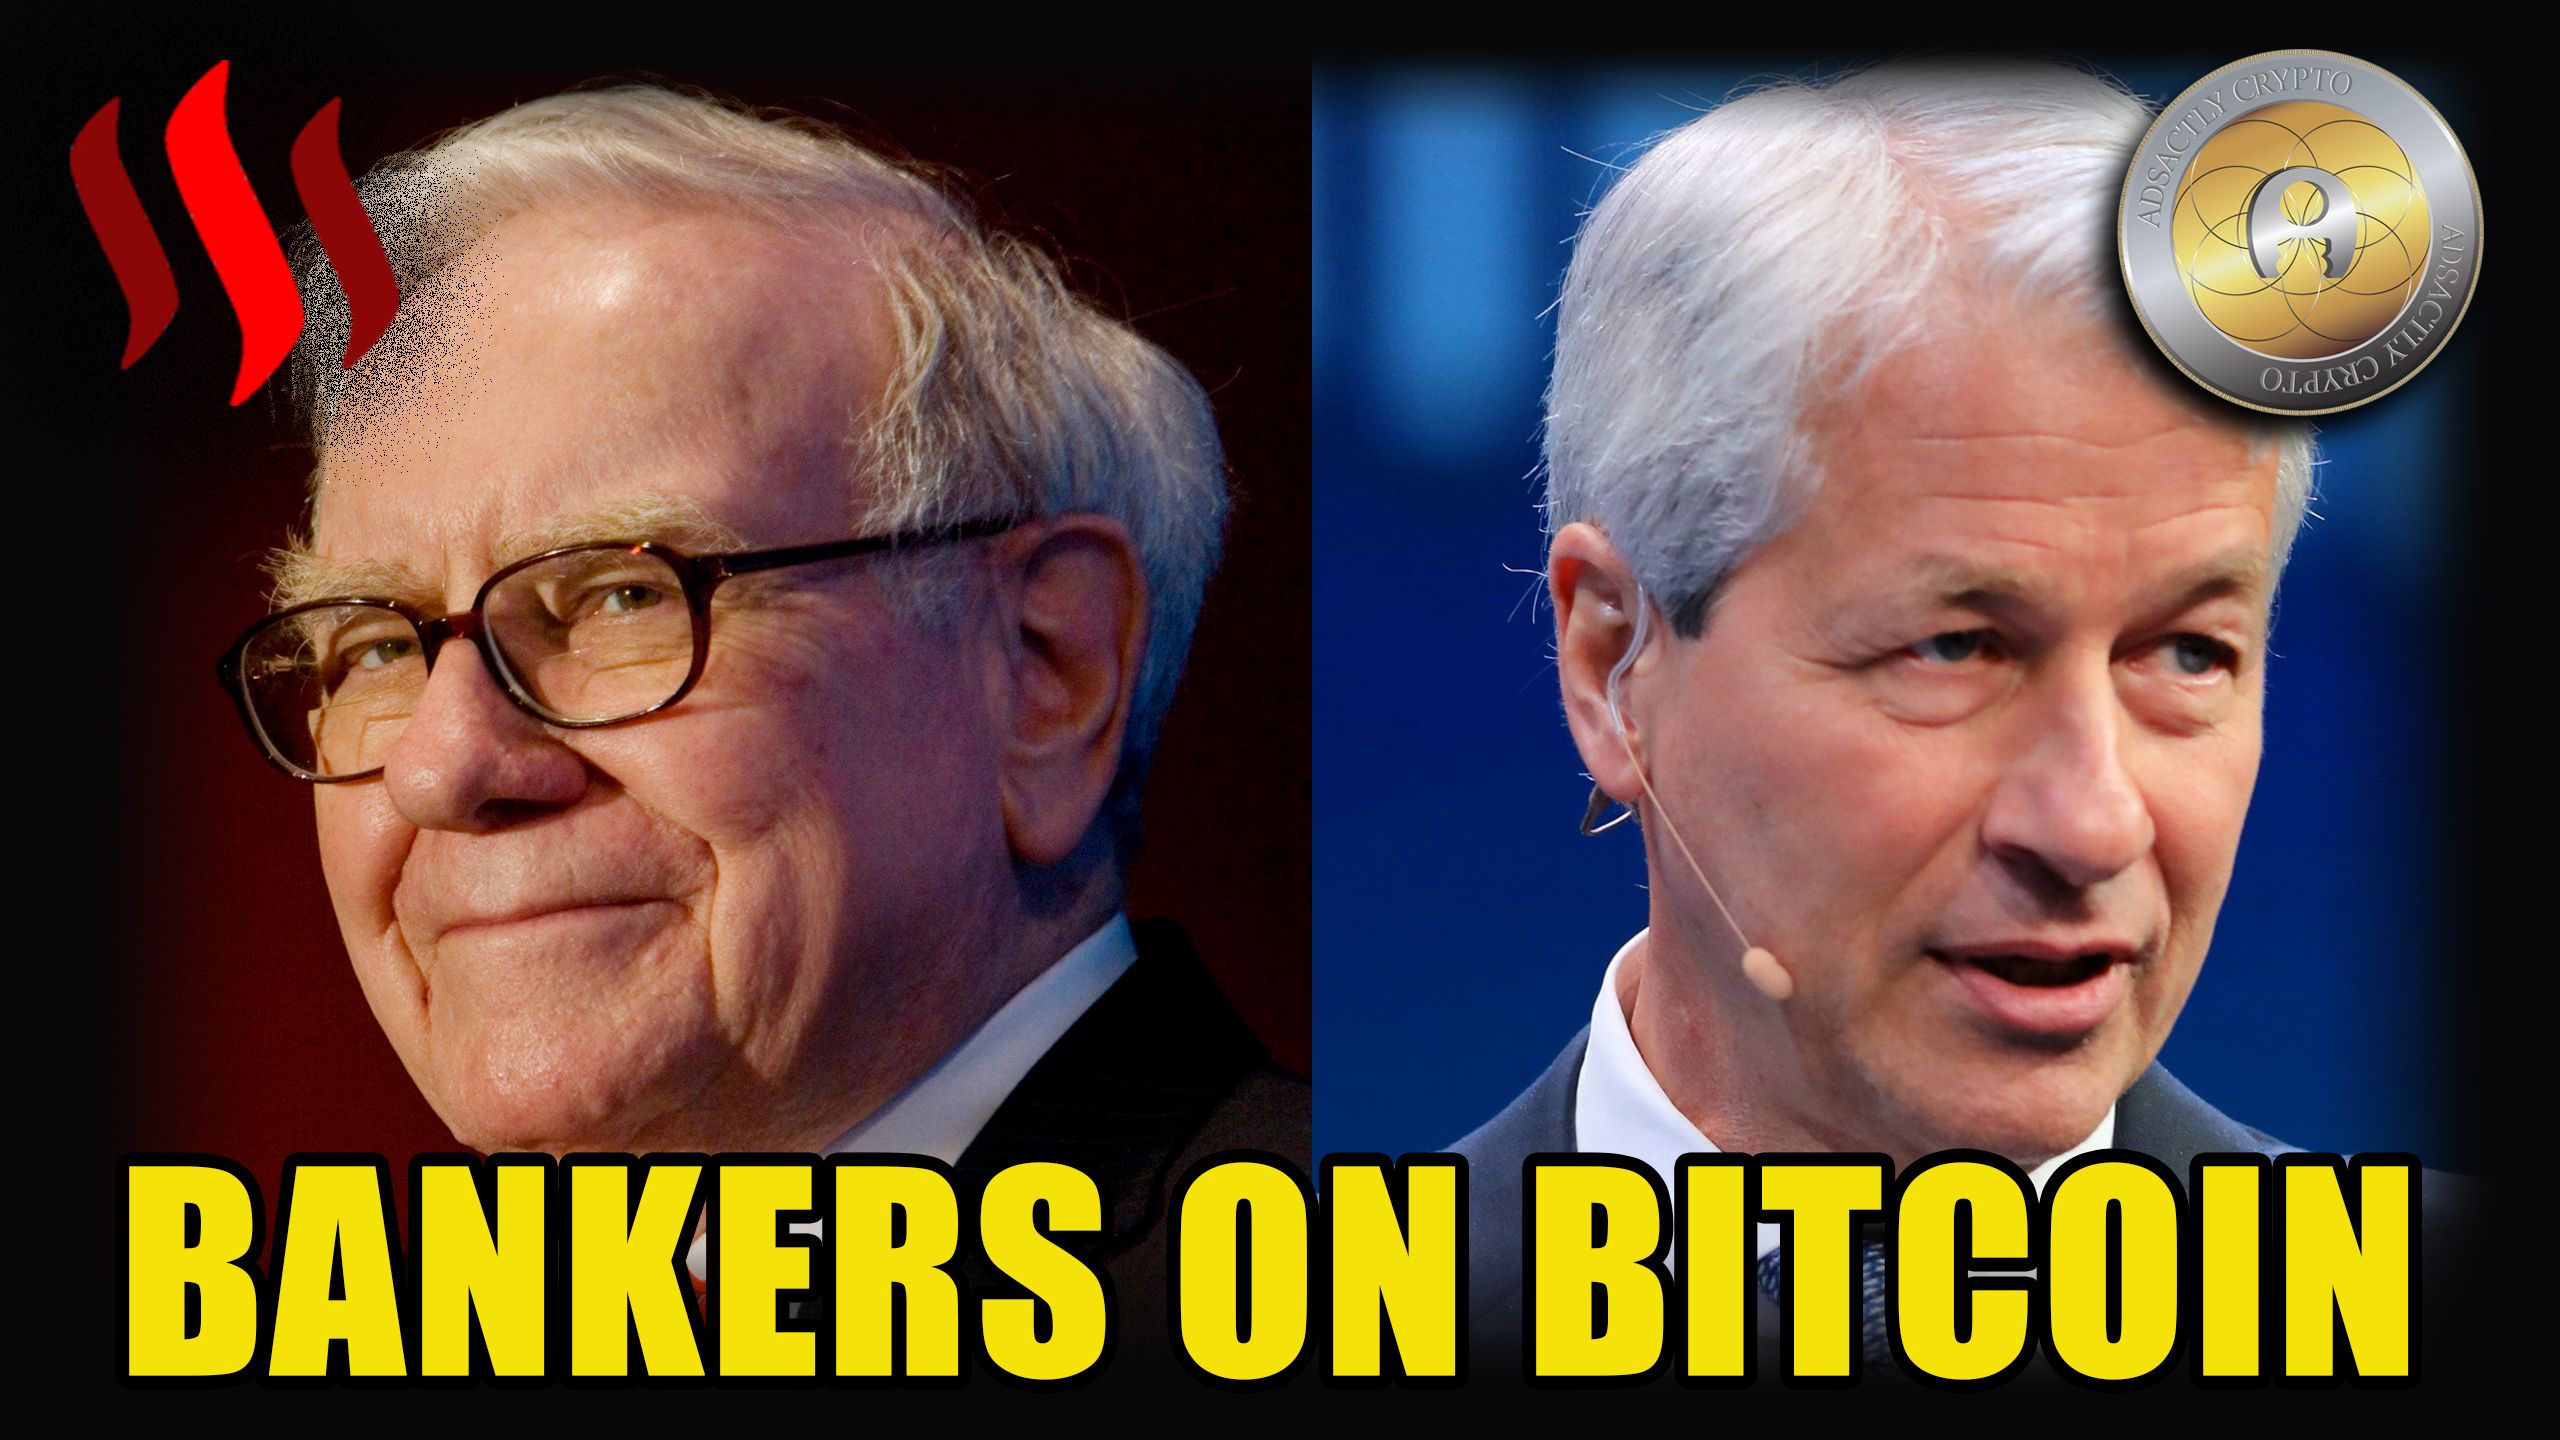 Bankers on Bitcoin Cover 2.jpg